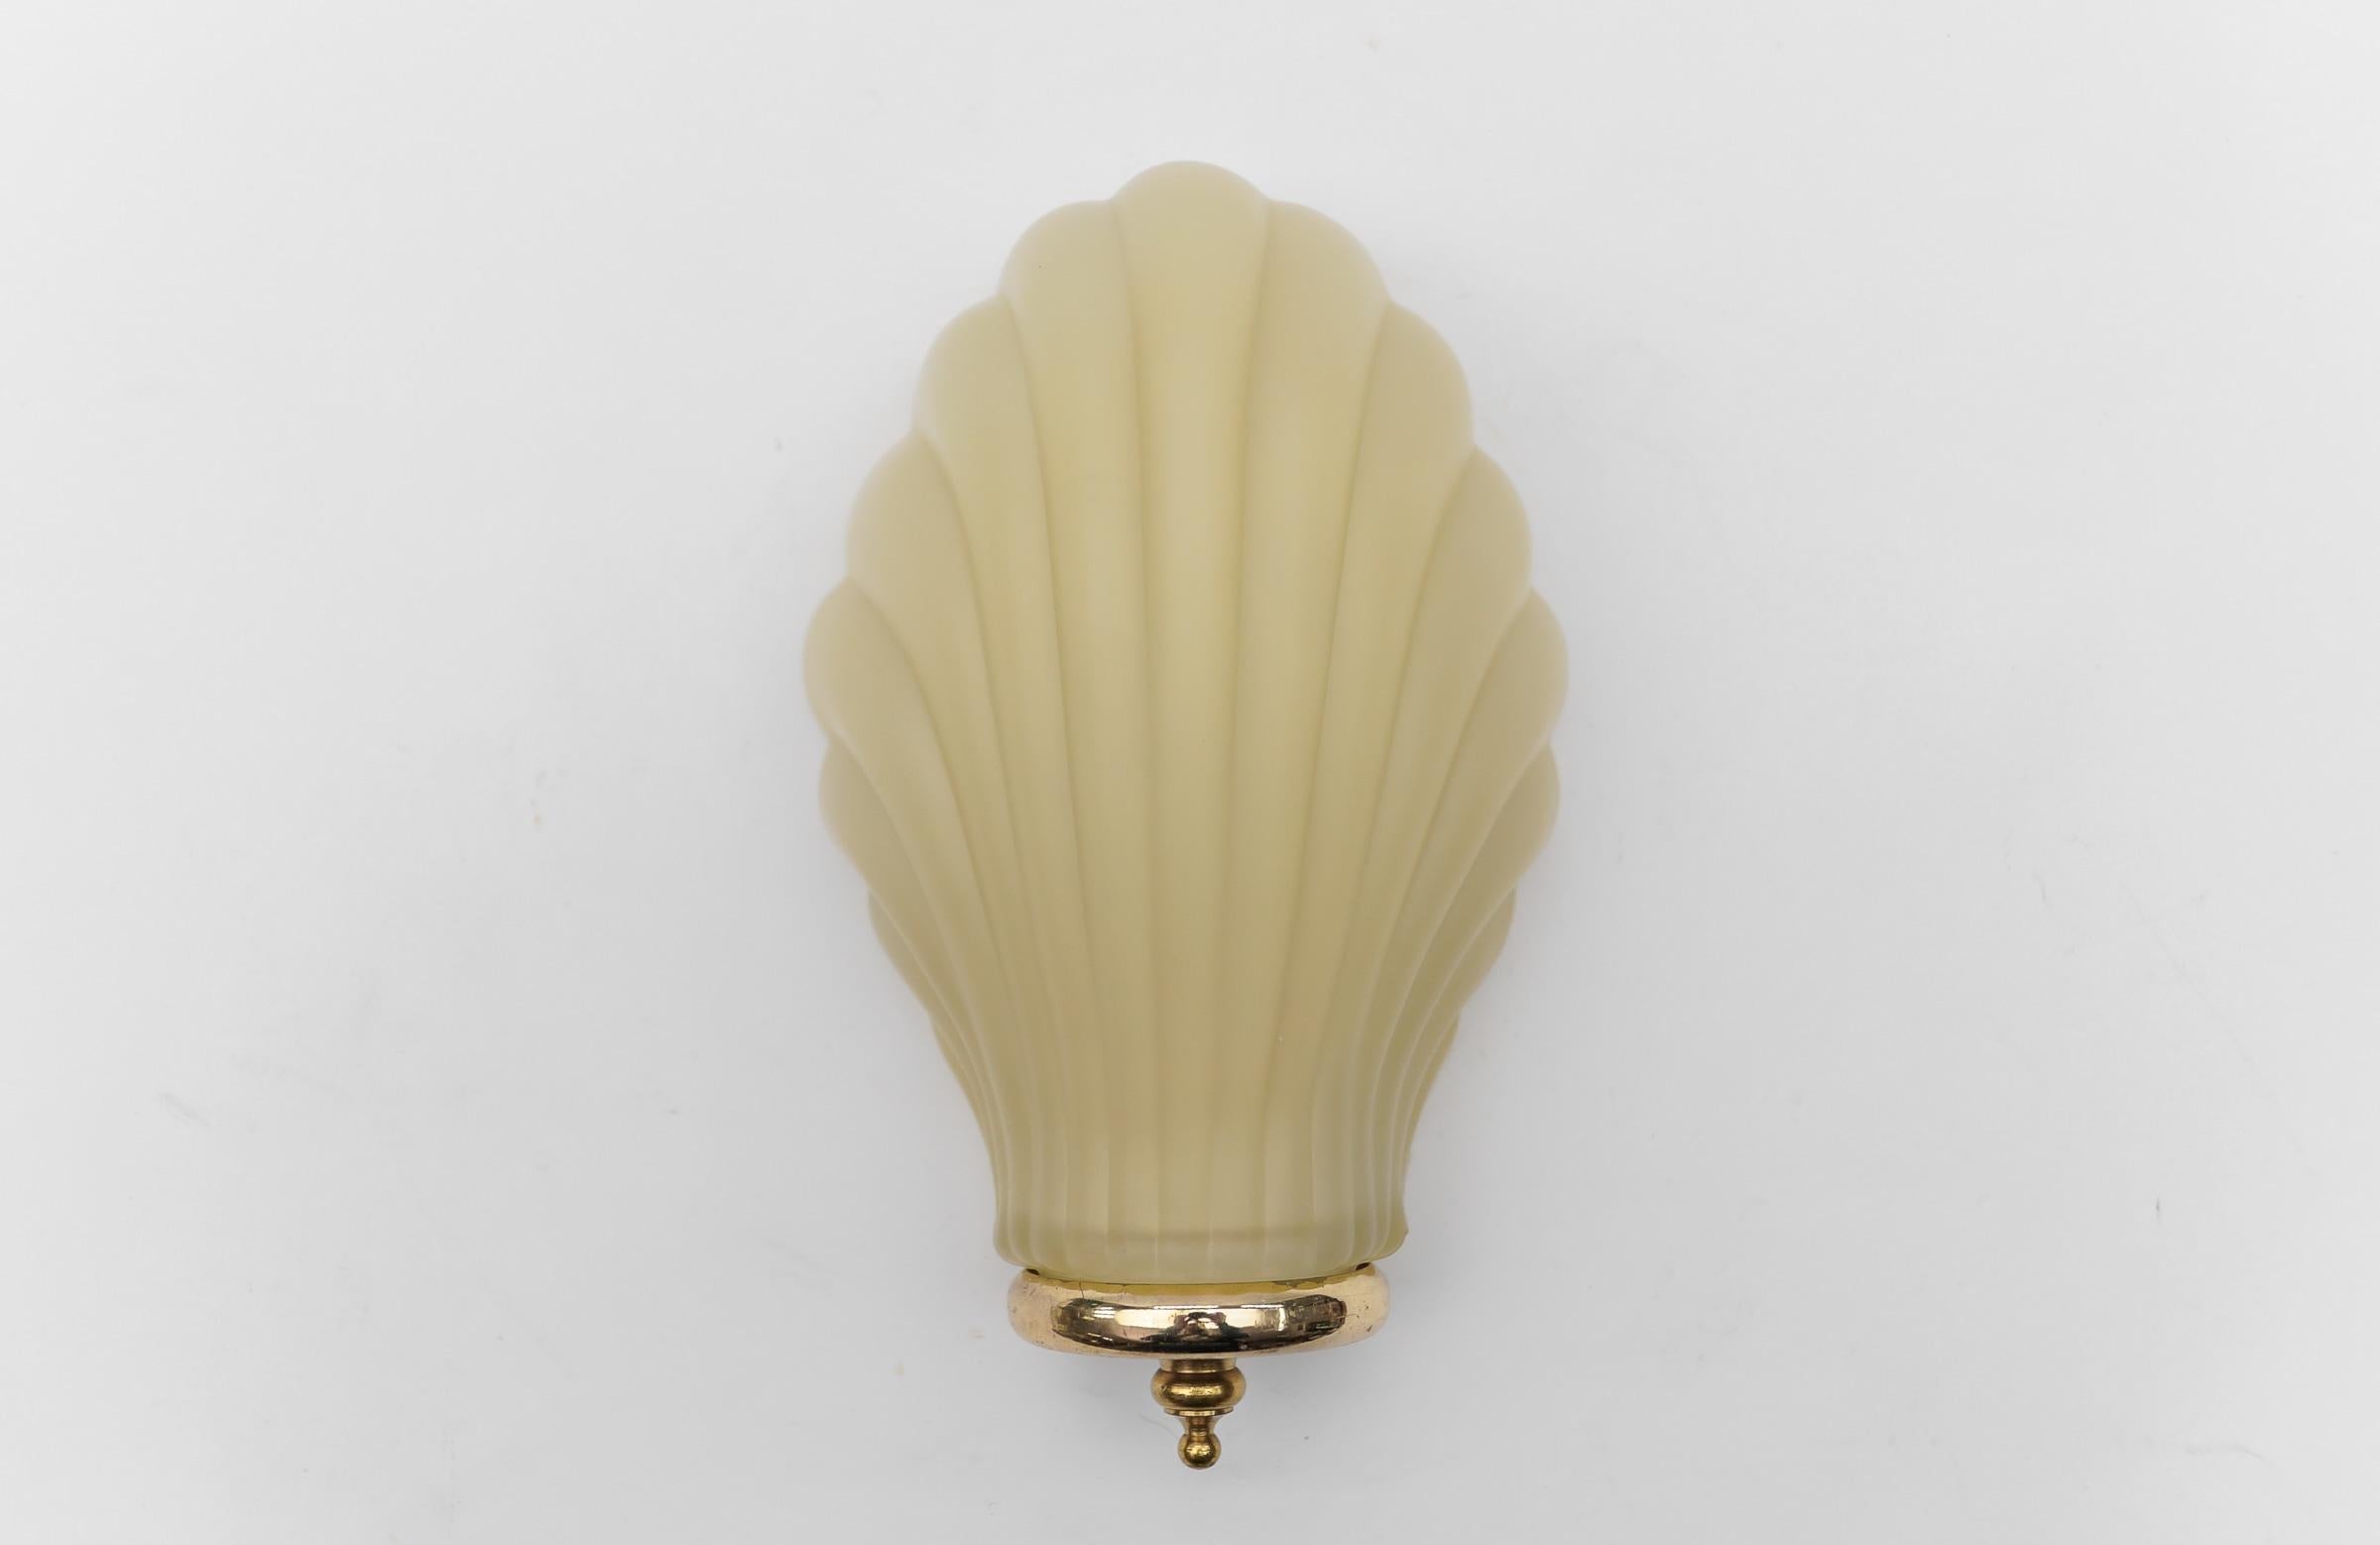 Satin Elegant Glass Shell Wall Light, 1960s Italy  

Executed in satin glass and metal. 

This lamp need 1 x E14 / E15 Edison screw fit bulb is wired, in working condition and runs both on 110 / 230 volt. Dimmable.

Our lamps are checked, cleaned